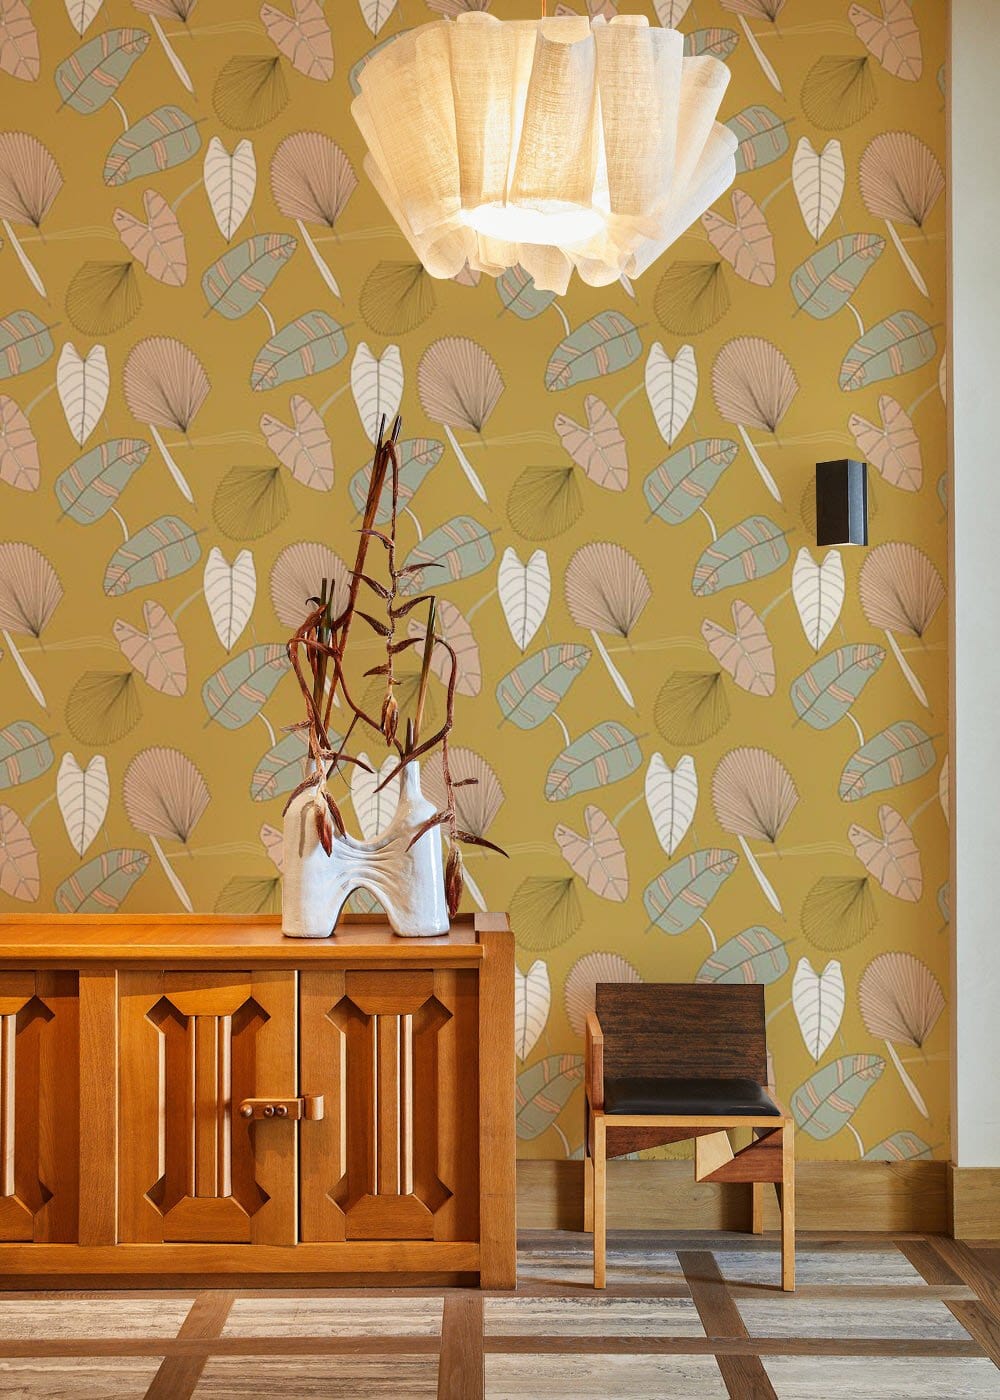 Wallpaper mural with a variety of leaves decorating the living room